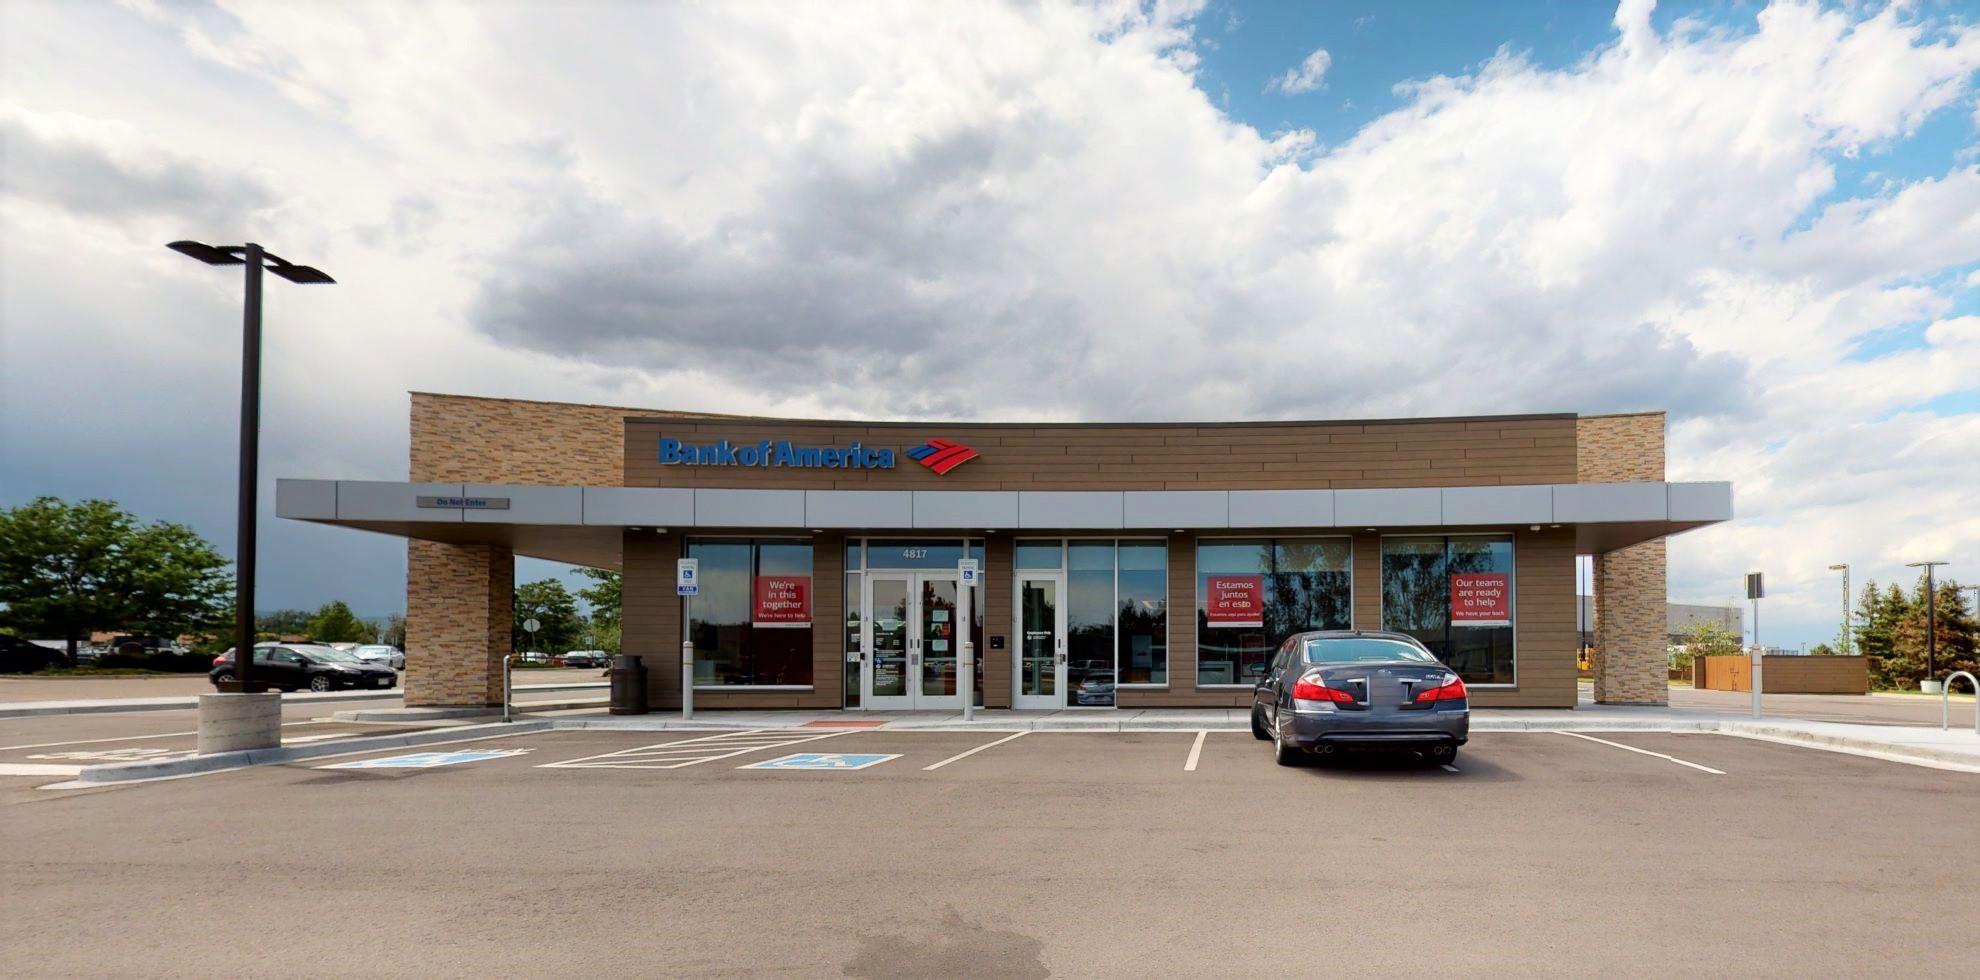 Bank of America financial center with drive-thru ATM | 4817 S Wadsworth Blvd, Denver, CO 80123